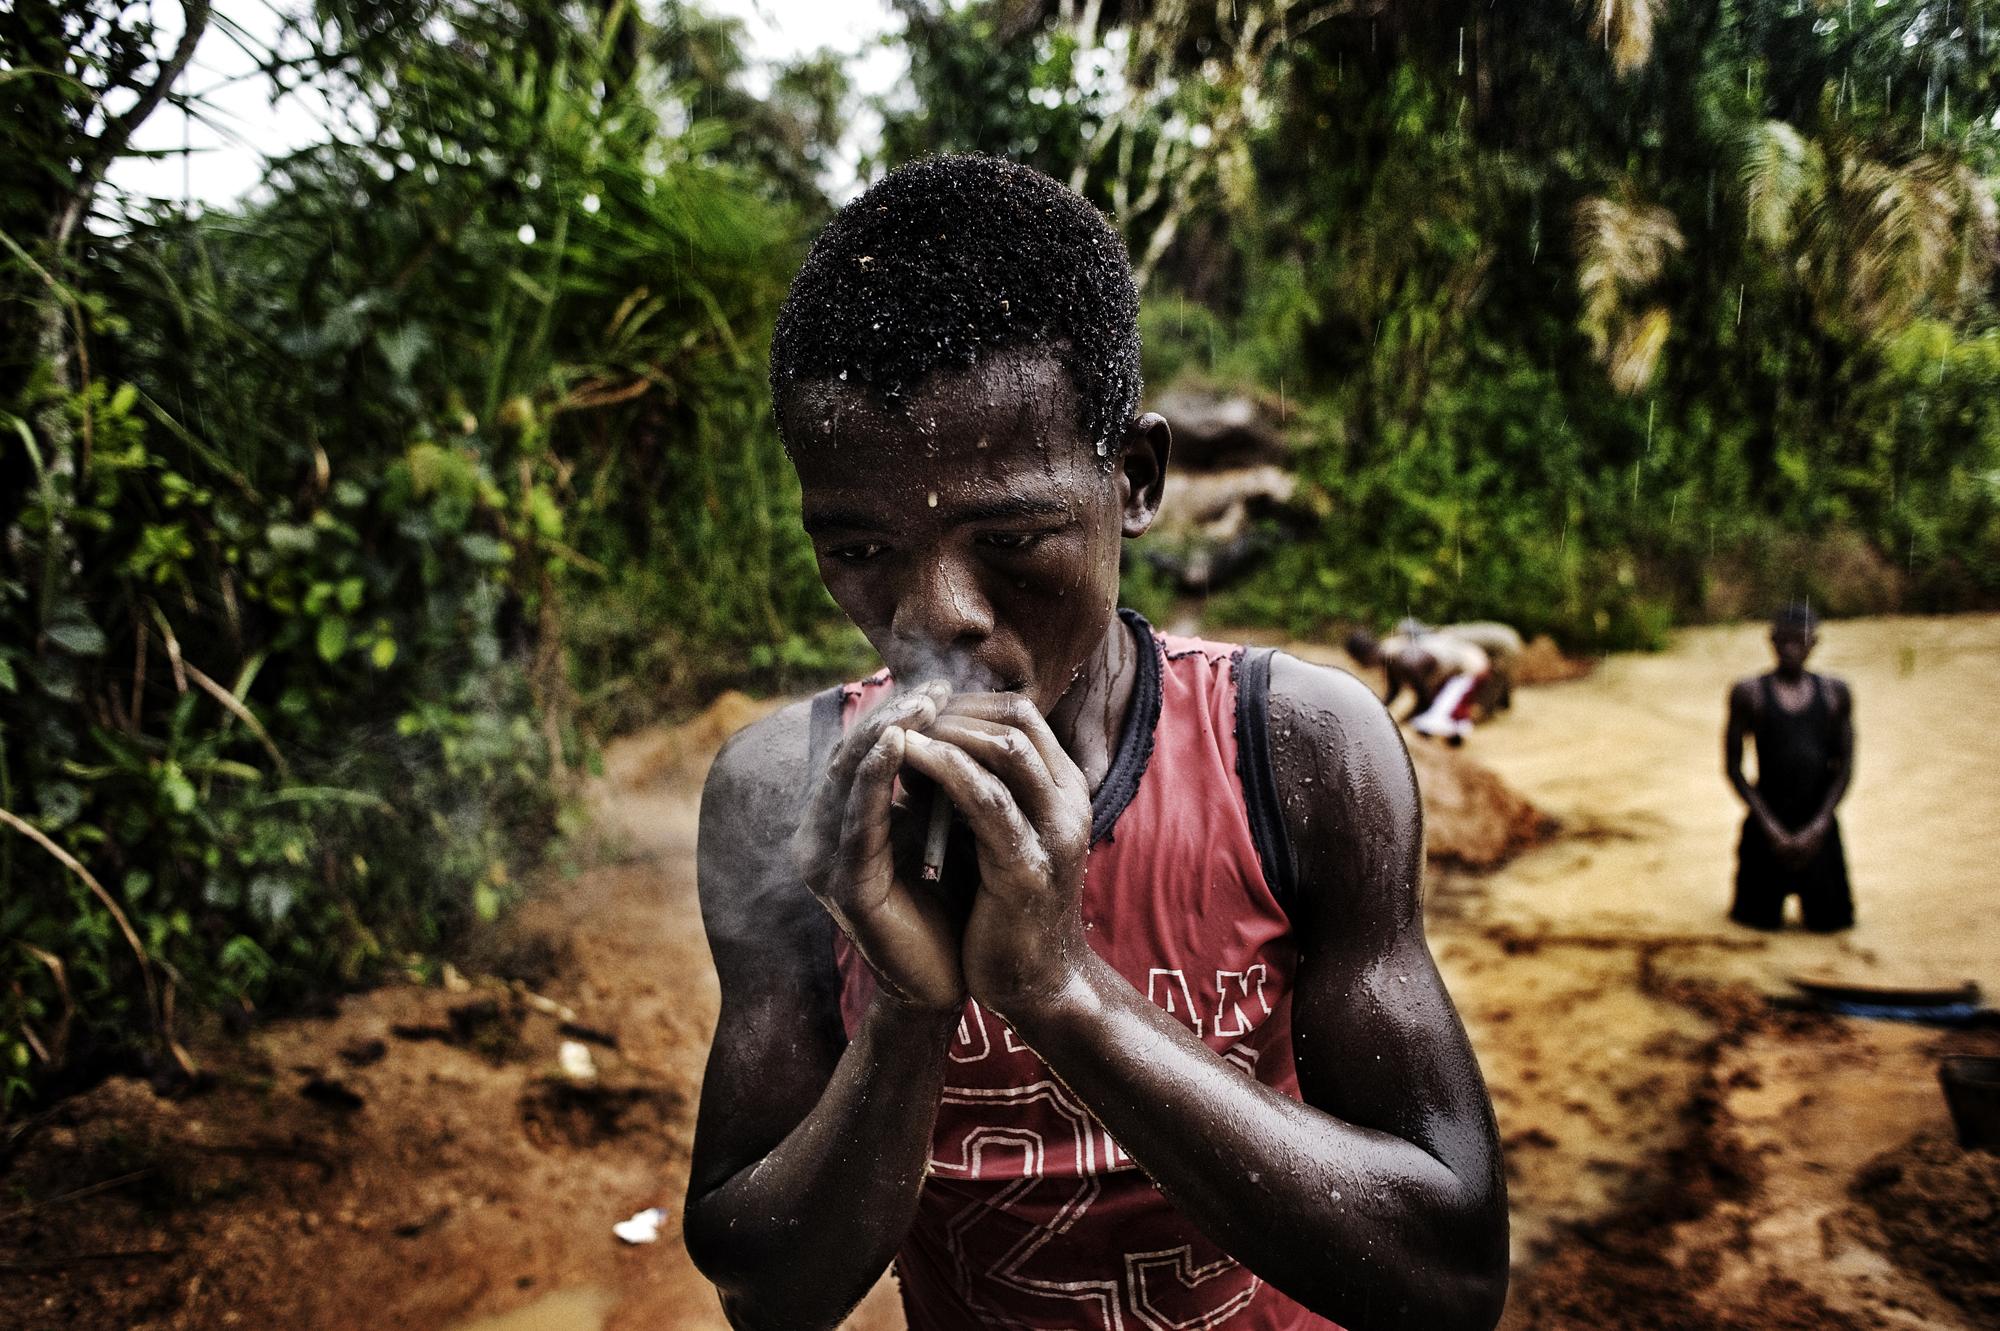 Diamond diggers - Sierra Leone, Koidu. August 2008. Portarit of a young...